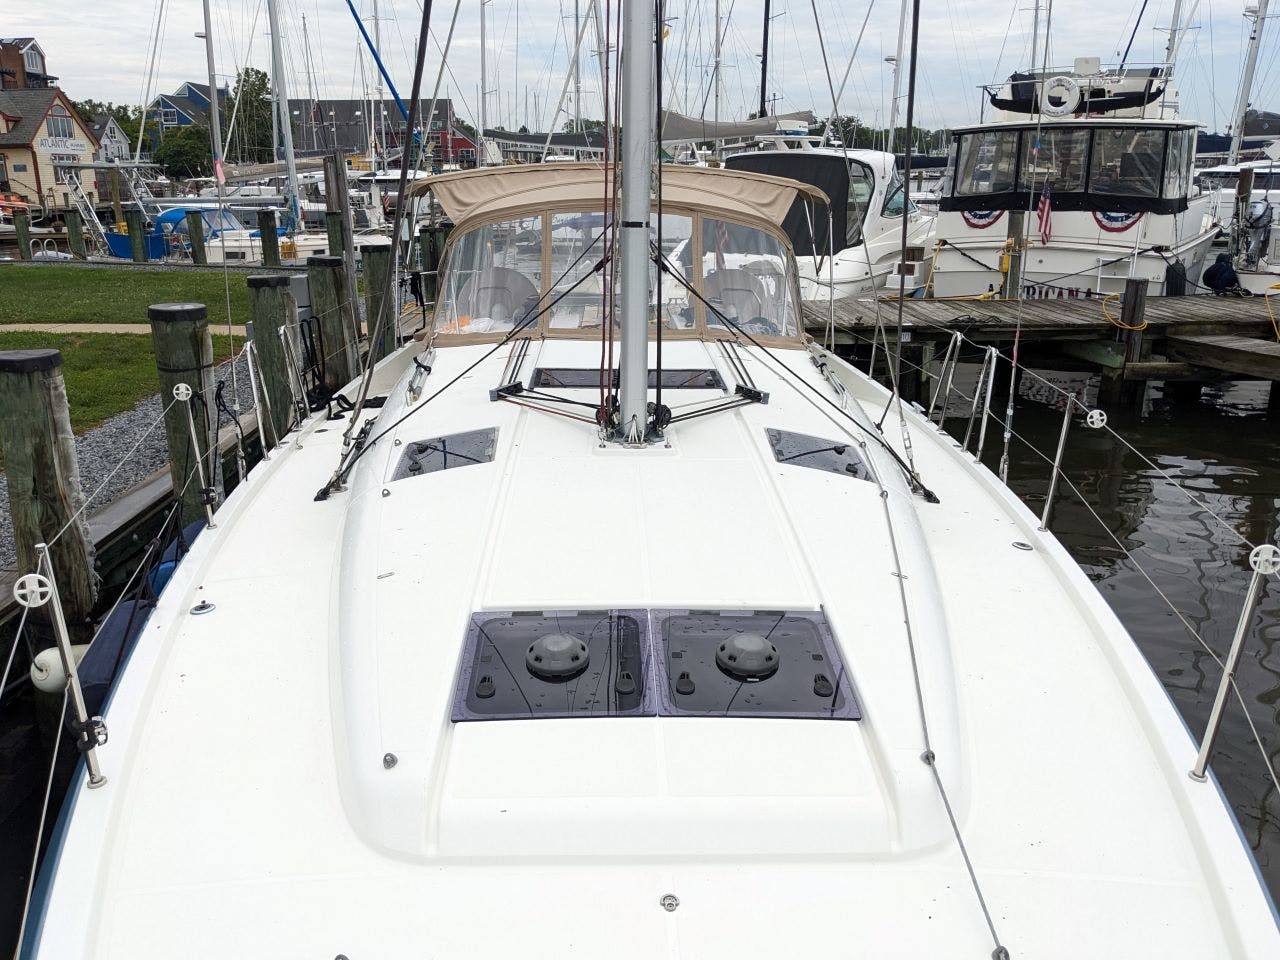 Book Sun Odyssey 440 - 3 cab. Sailing yacht for bareboat charter in Annapolis, Chesapeake Bay, Chesapeake Bay, USA with TripYacht!, picture 4